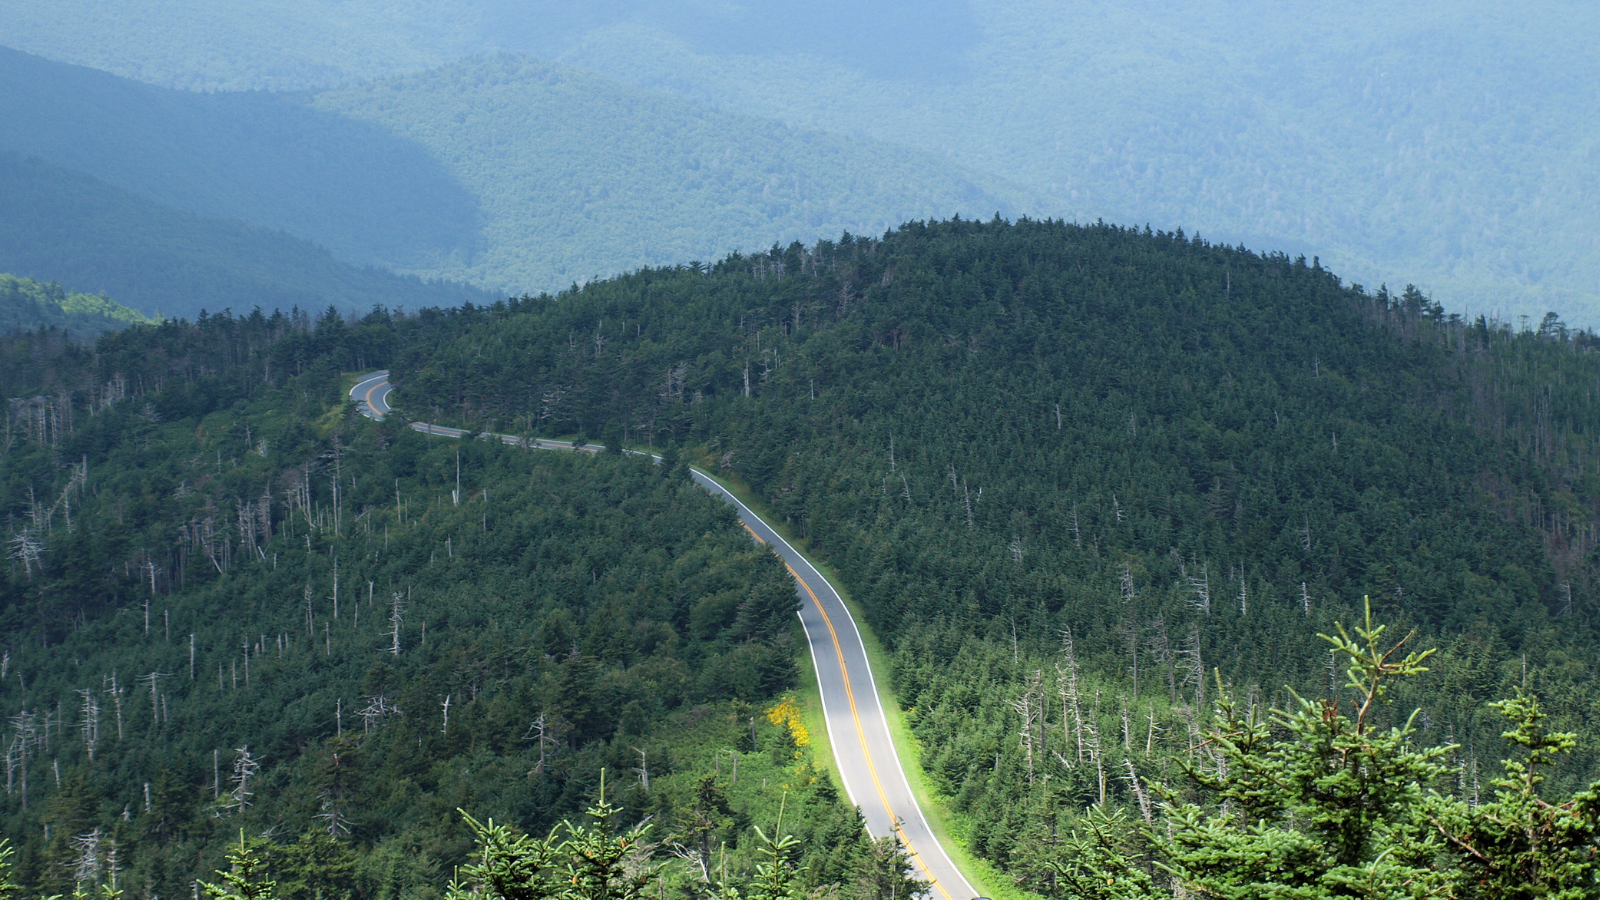 A ribbon of highway cut through green mountains looks like the Blue Ridge Parkway